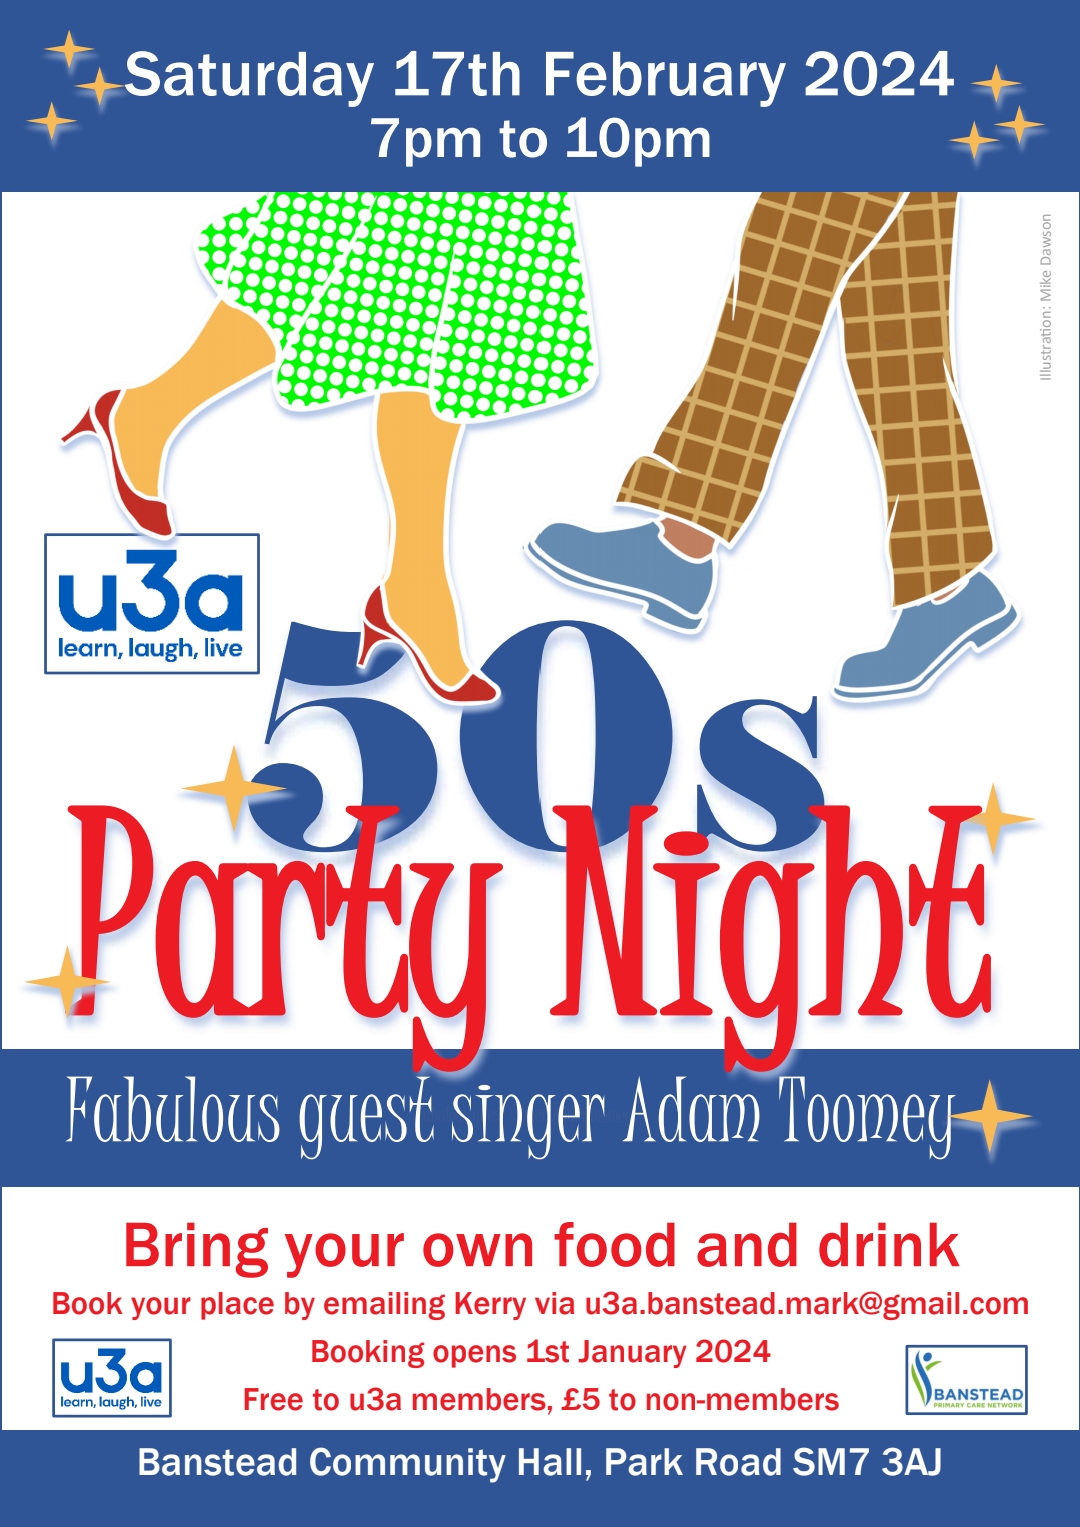 50s Party Night